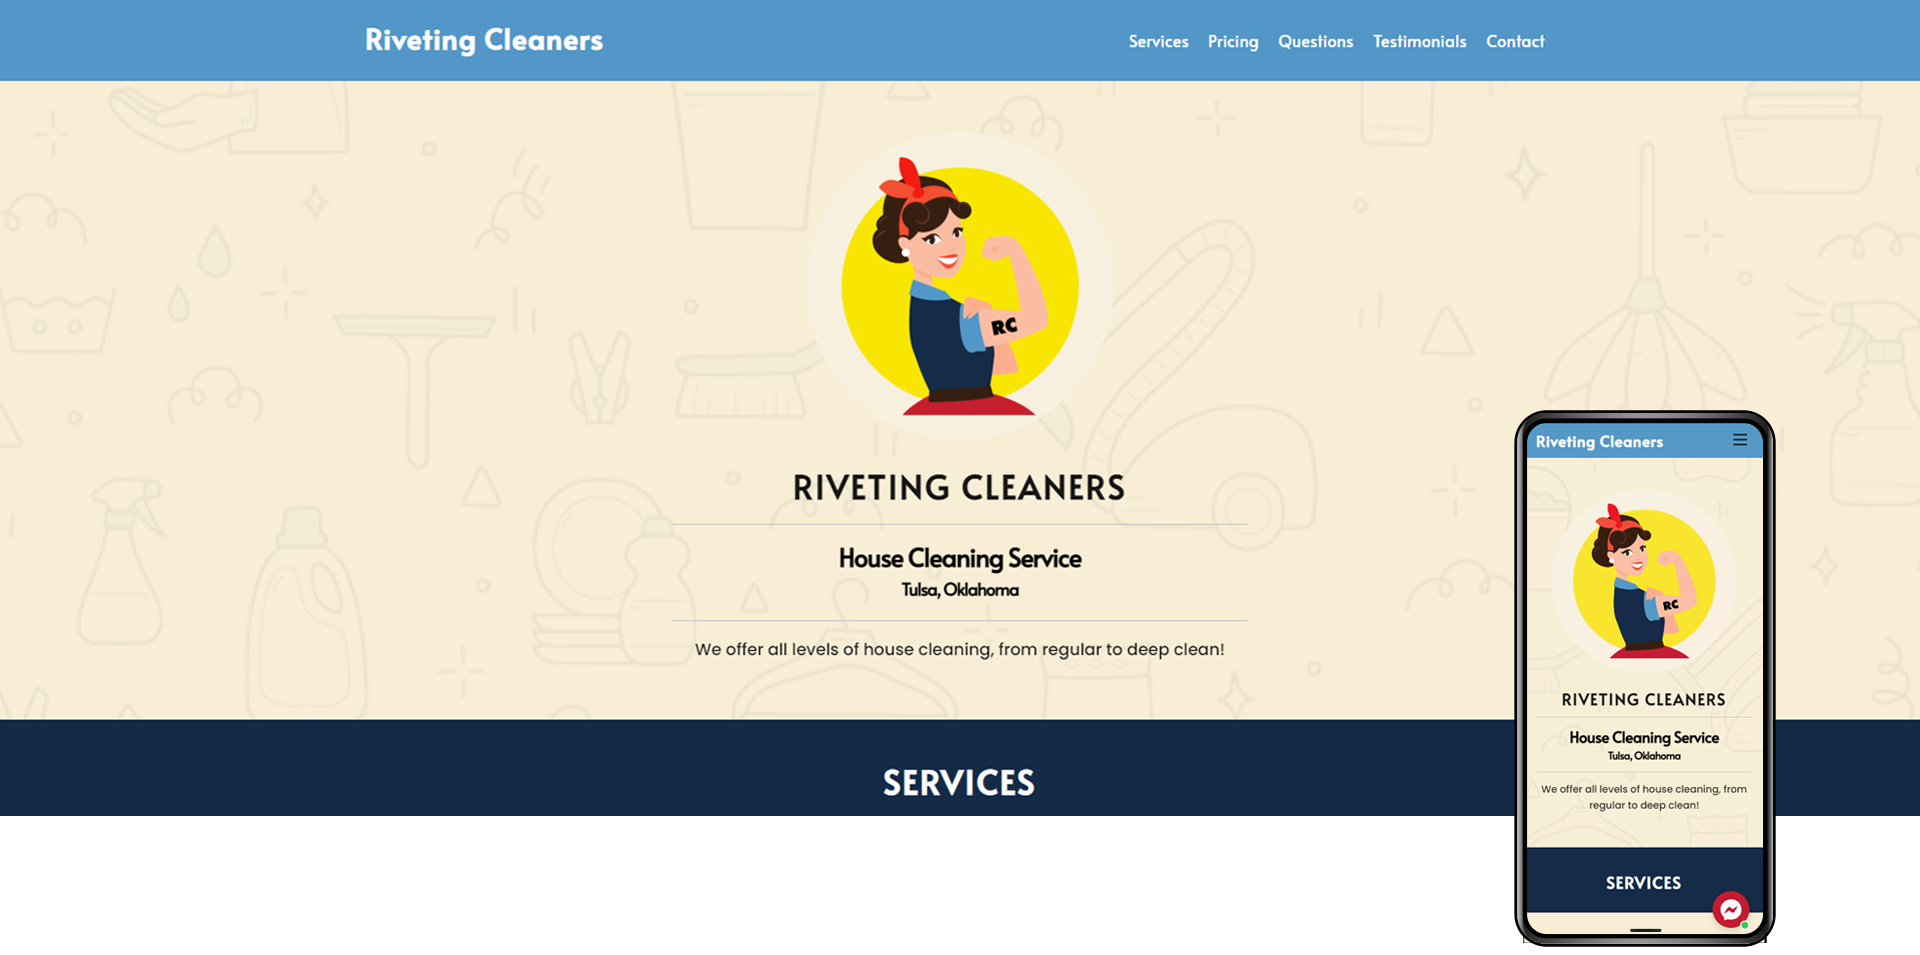 Website Examples - Riveting Cleaners